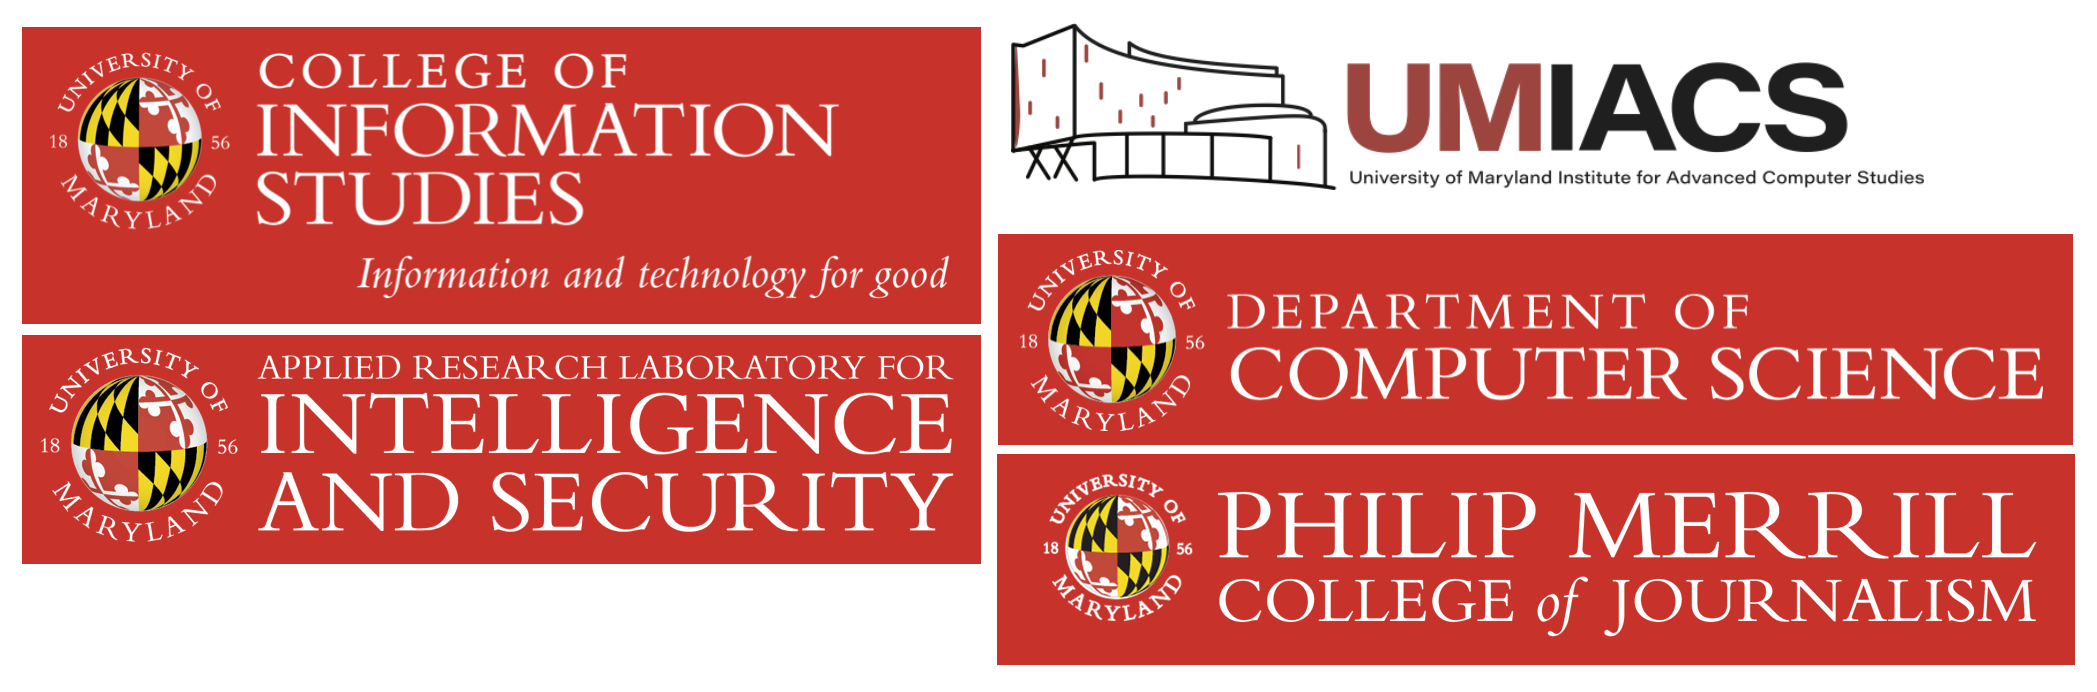 Logos of campus sponsors: College of Information Studies, UMIACS, Applied Research Laboratory for Intelligence and Security, Department of Computer Science, and Philip Merrill College of Journalism